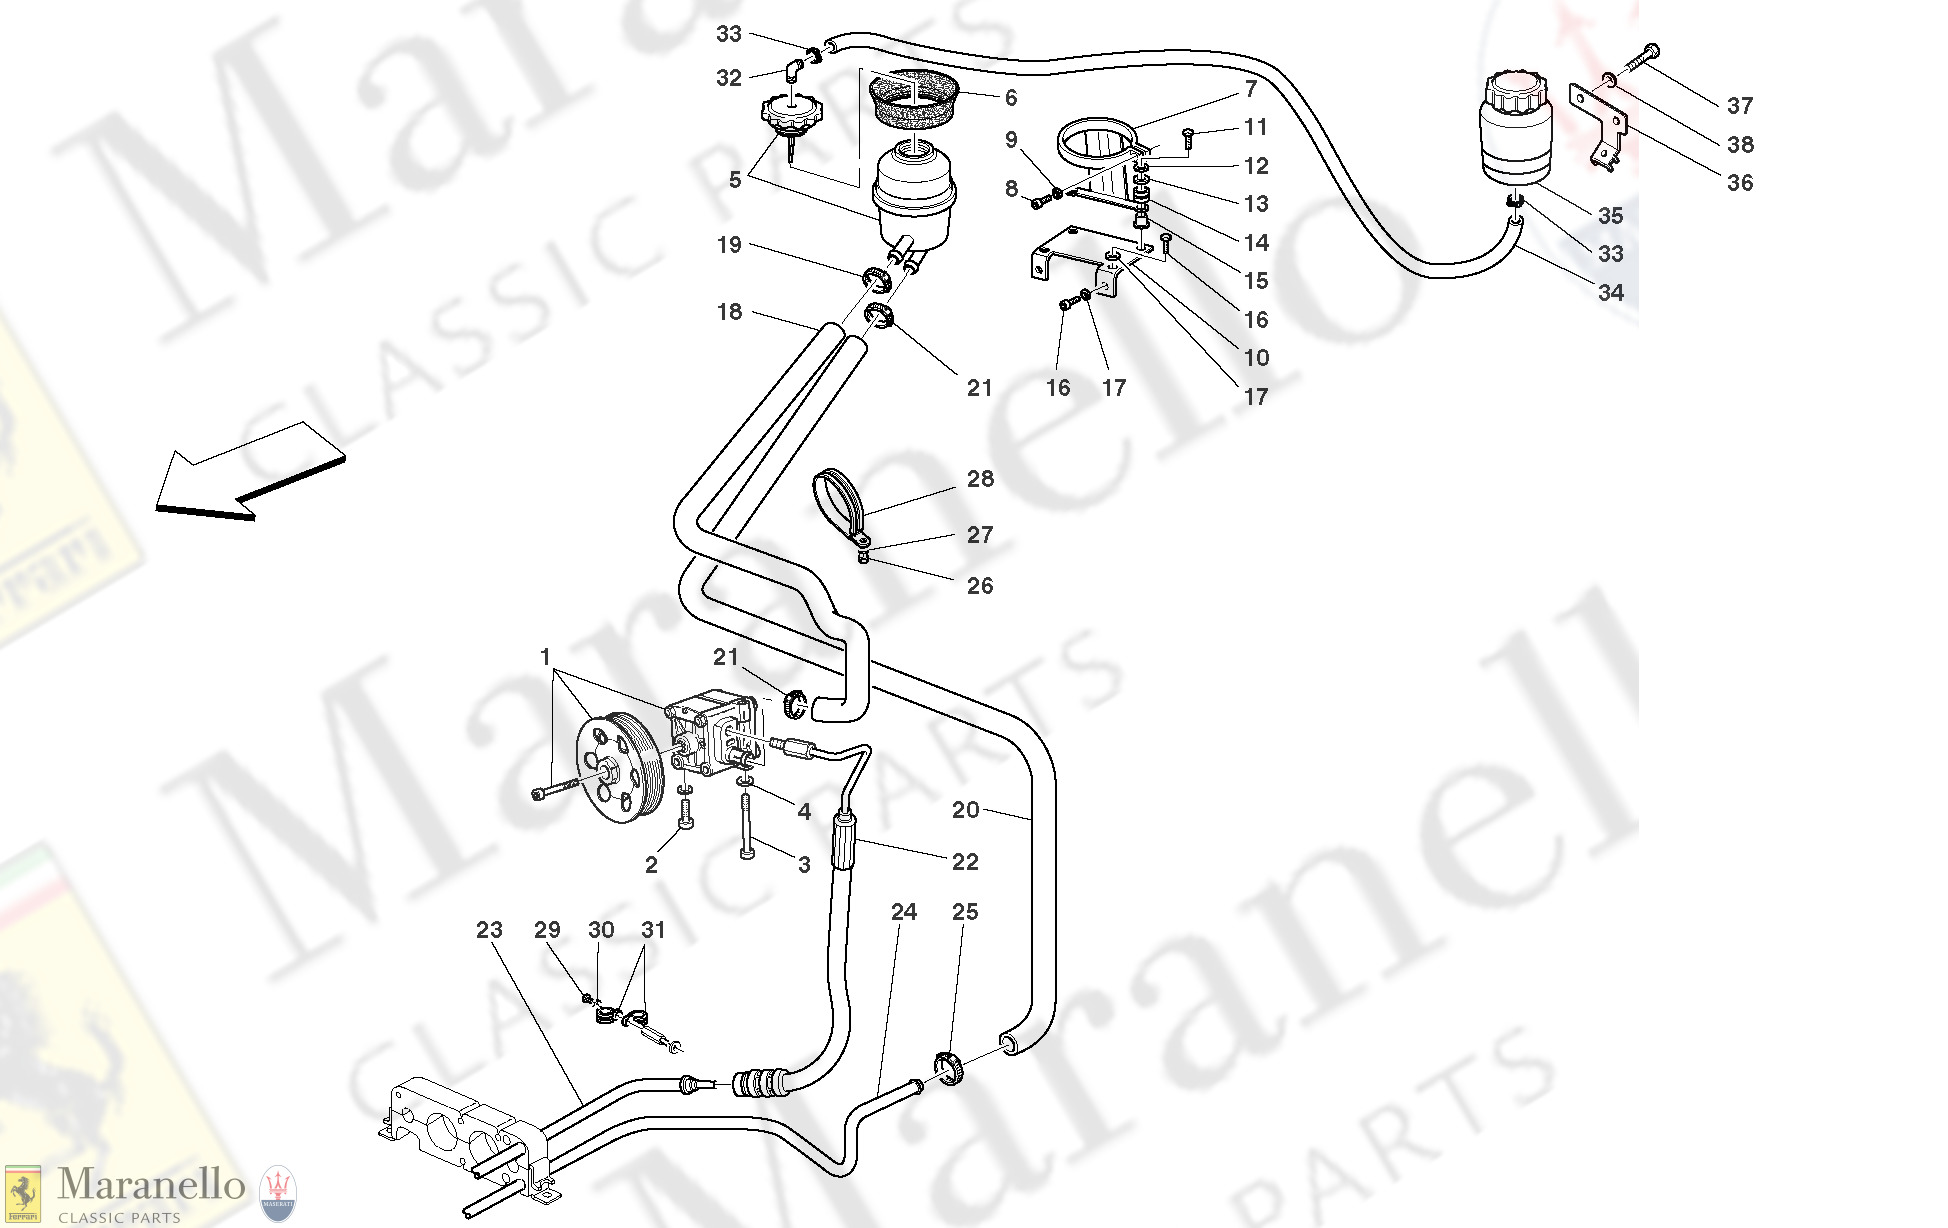 036 - Hydraulic Steering Pump And Tank